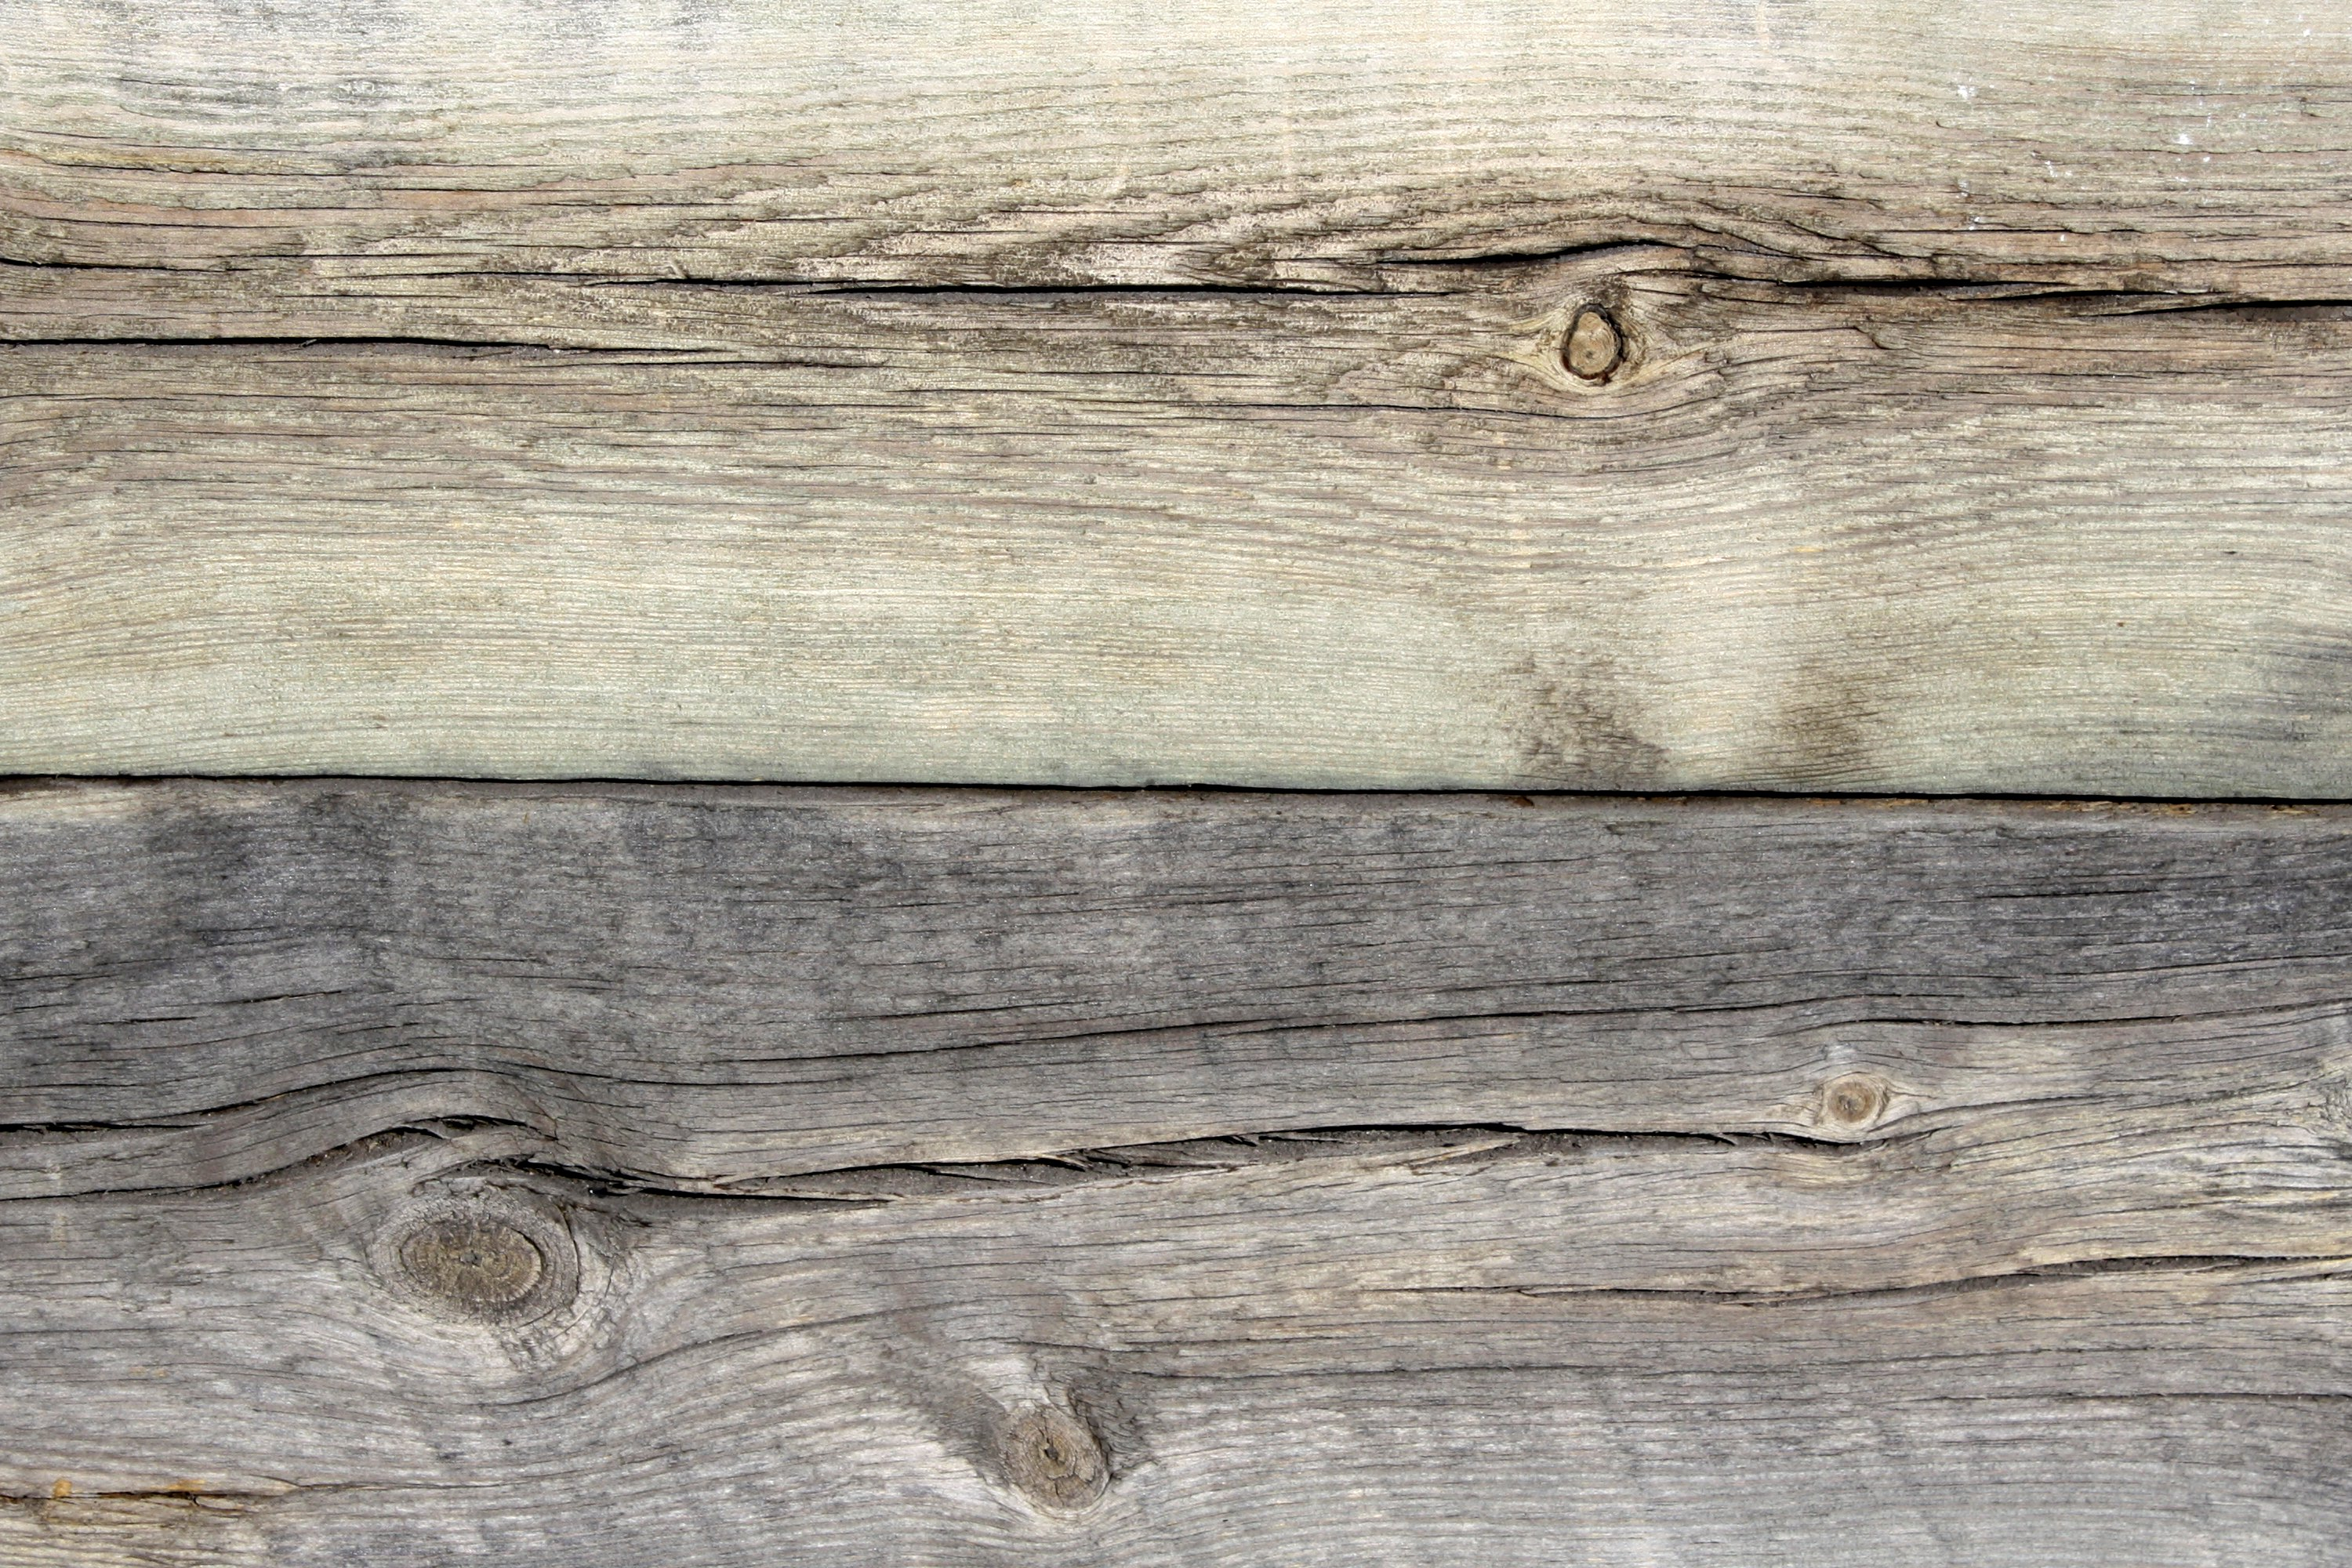 3000x2000 Weathered Wood Boards Close Up Texture Picture | Free Photograph | Photos Public Domai